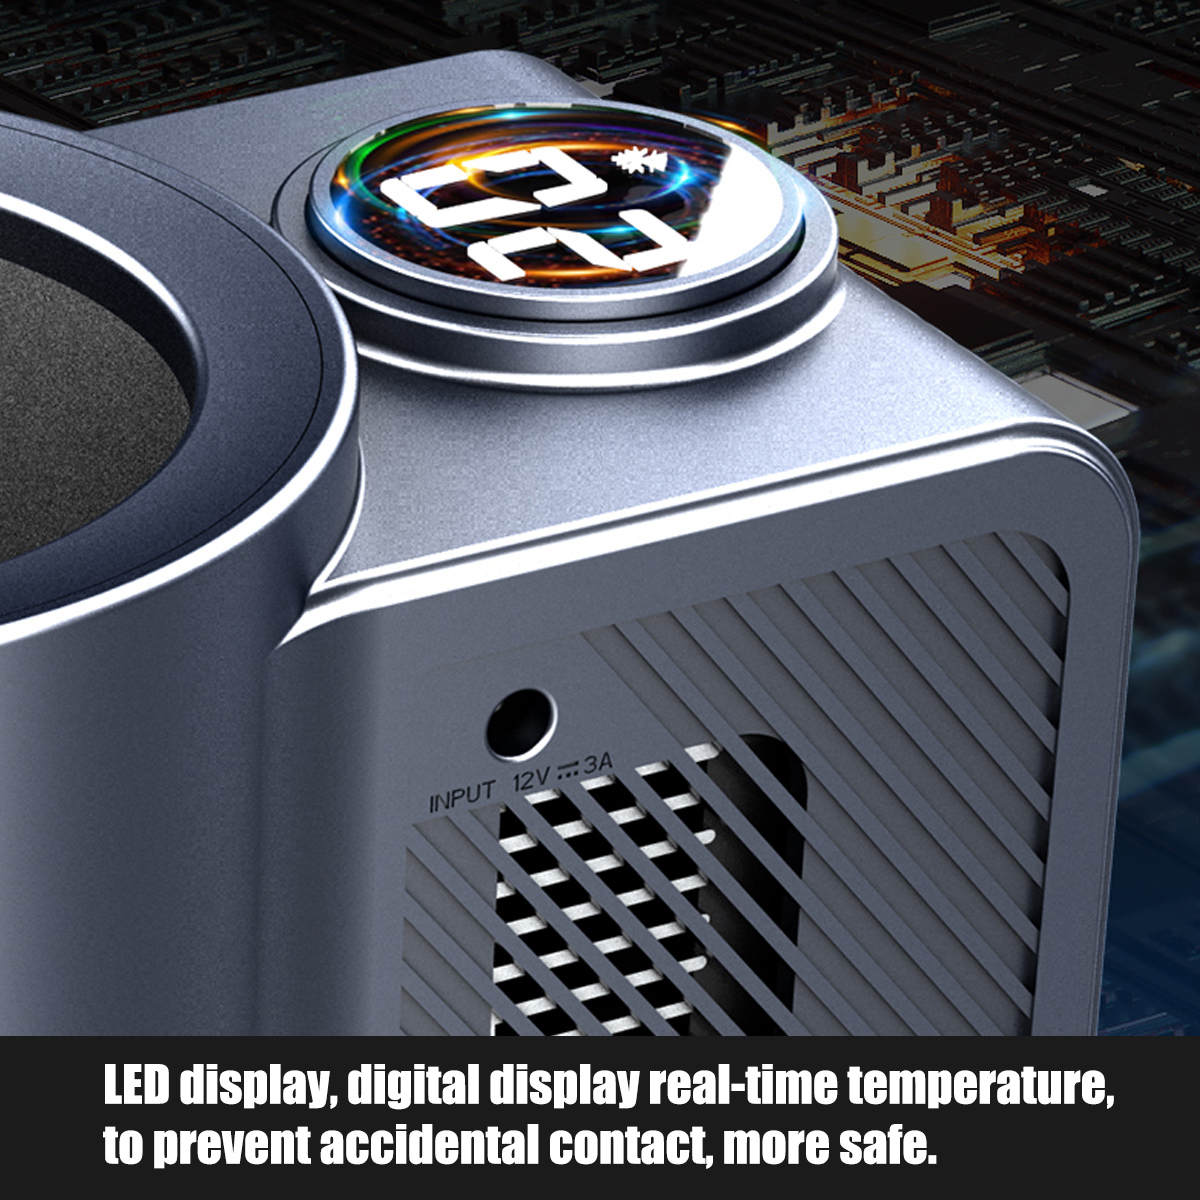 Bakeey-Touch-Screen-Smart-Car-Cooling-Cup-With-Temperature-Display-Cooling-Drinks-Holders-1857302-3